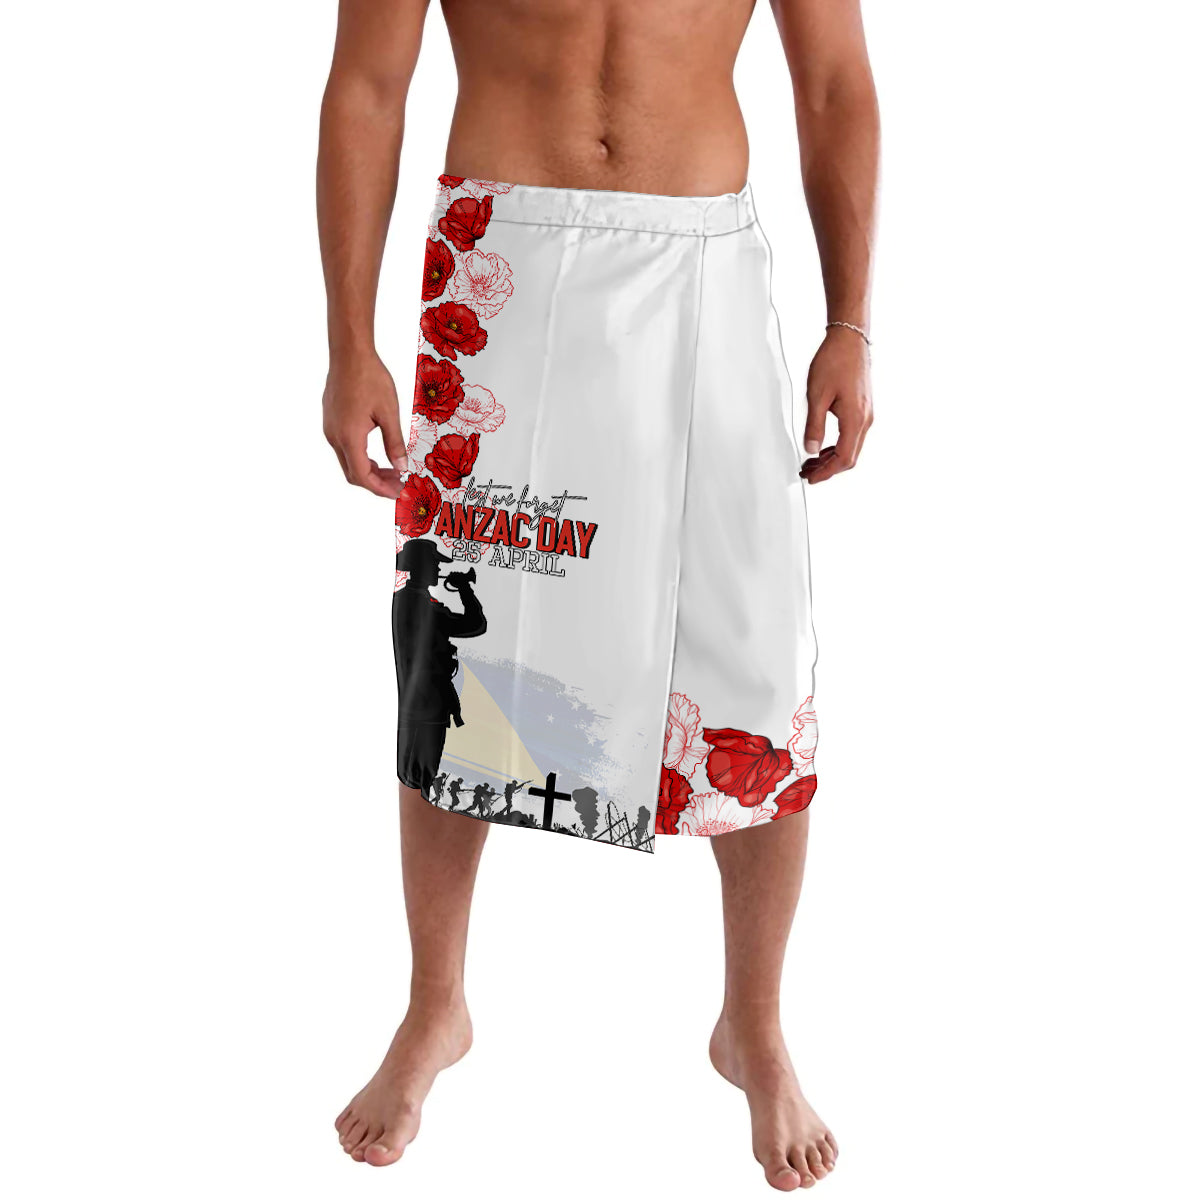 Tokelau ANZAC Day Lavalava Lest We Forget Red Poppy Flowers and Soldier LT03 White - Polynesian Pride